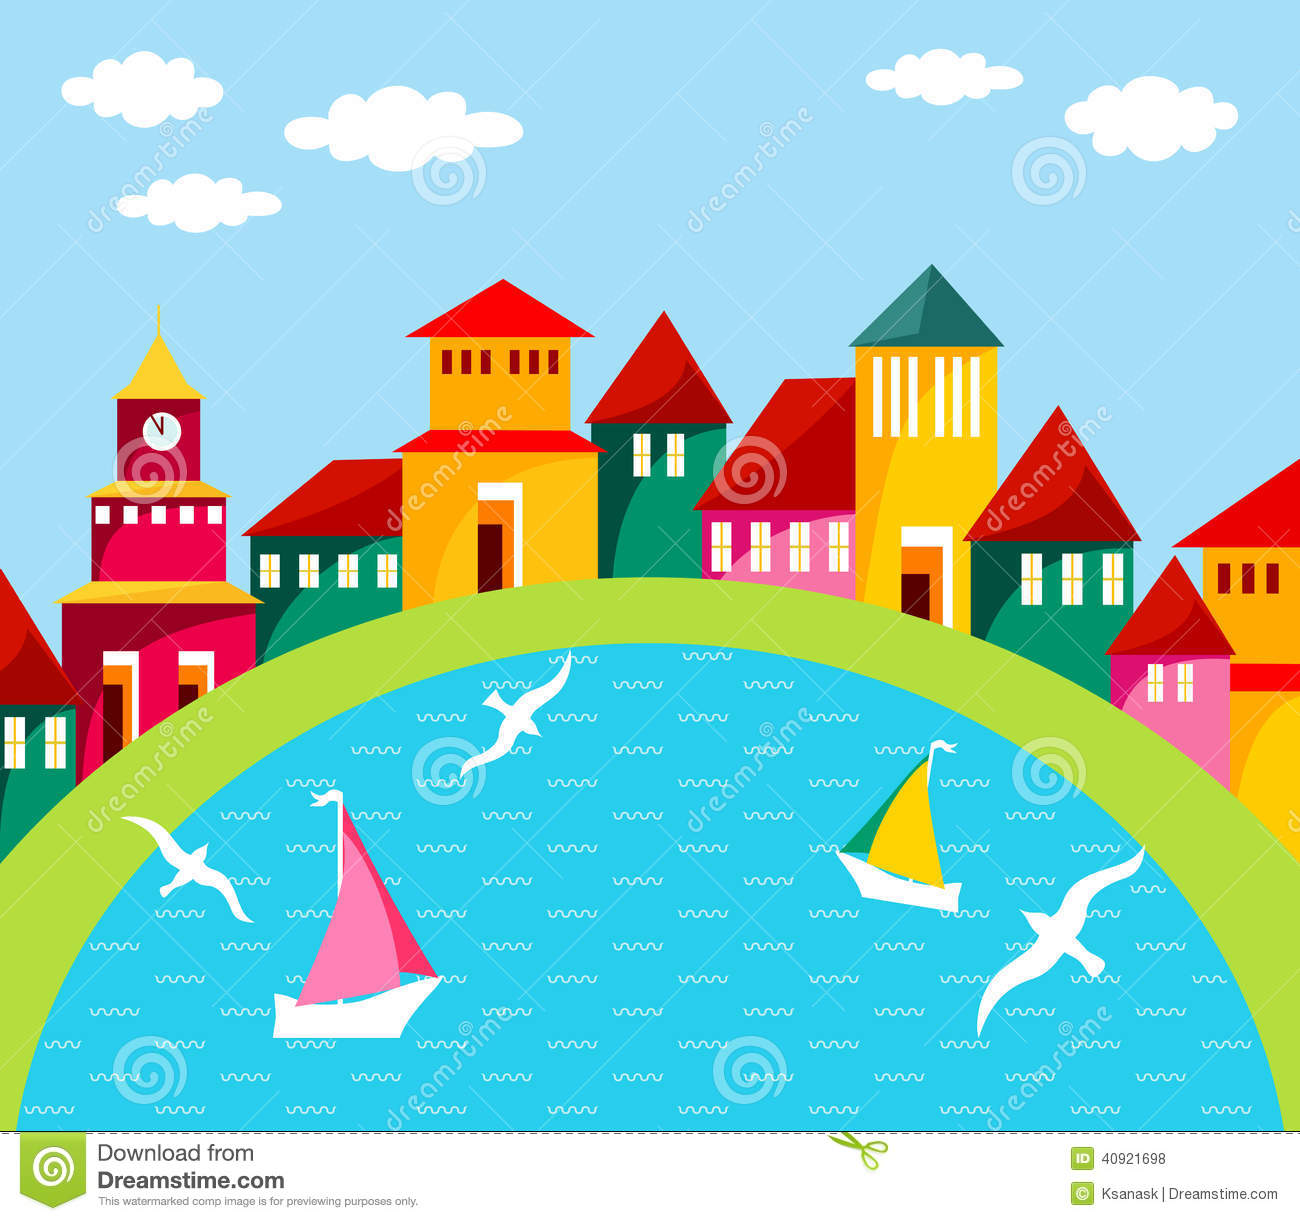     Town  Seaside Scene Of Harbour With Yachts And Seagulls  Flat Design